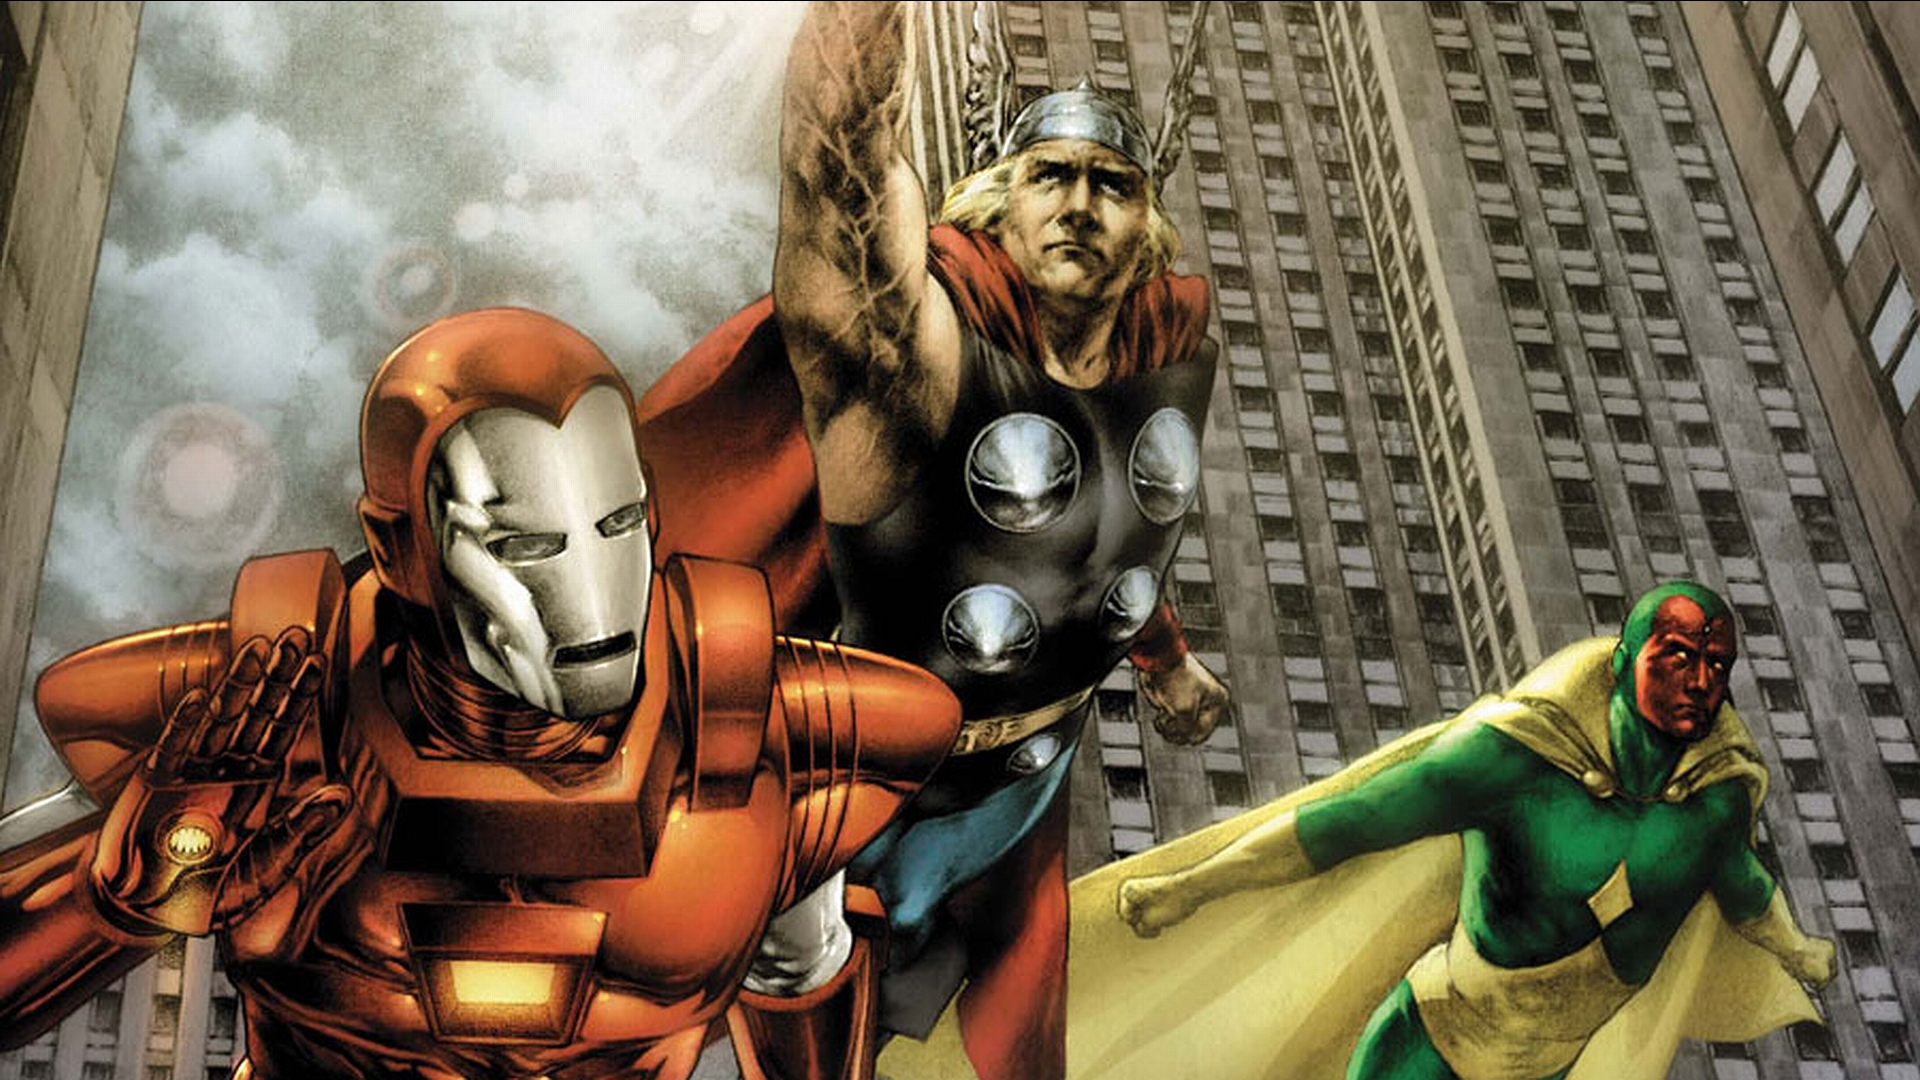 Marvel's mighty Avengers including Iron Man, Thor, and Vision assembled in a dynamic comic art wallpaper.